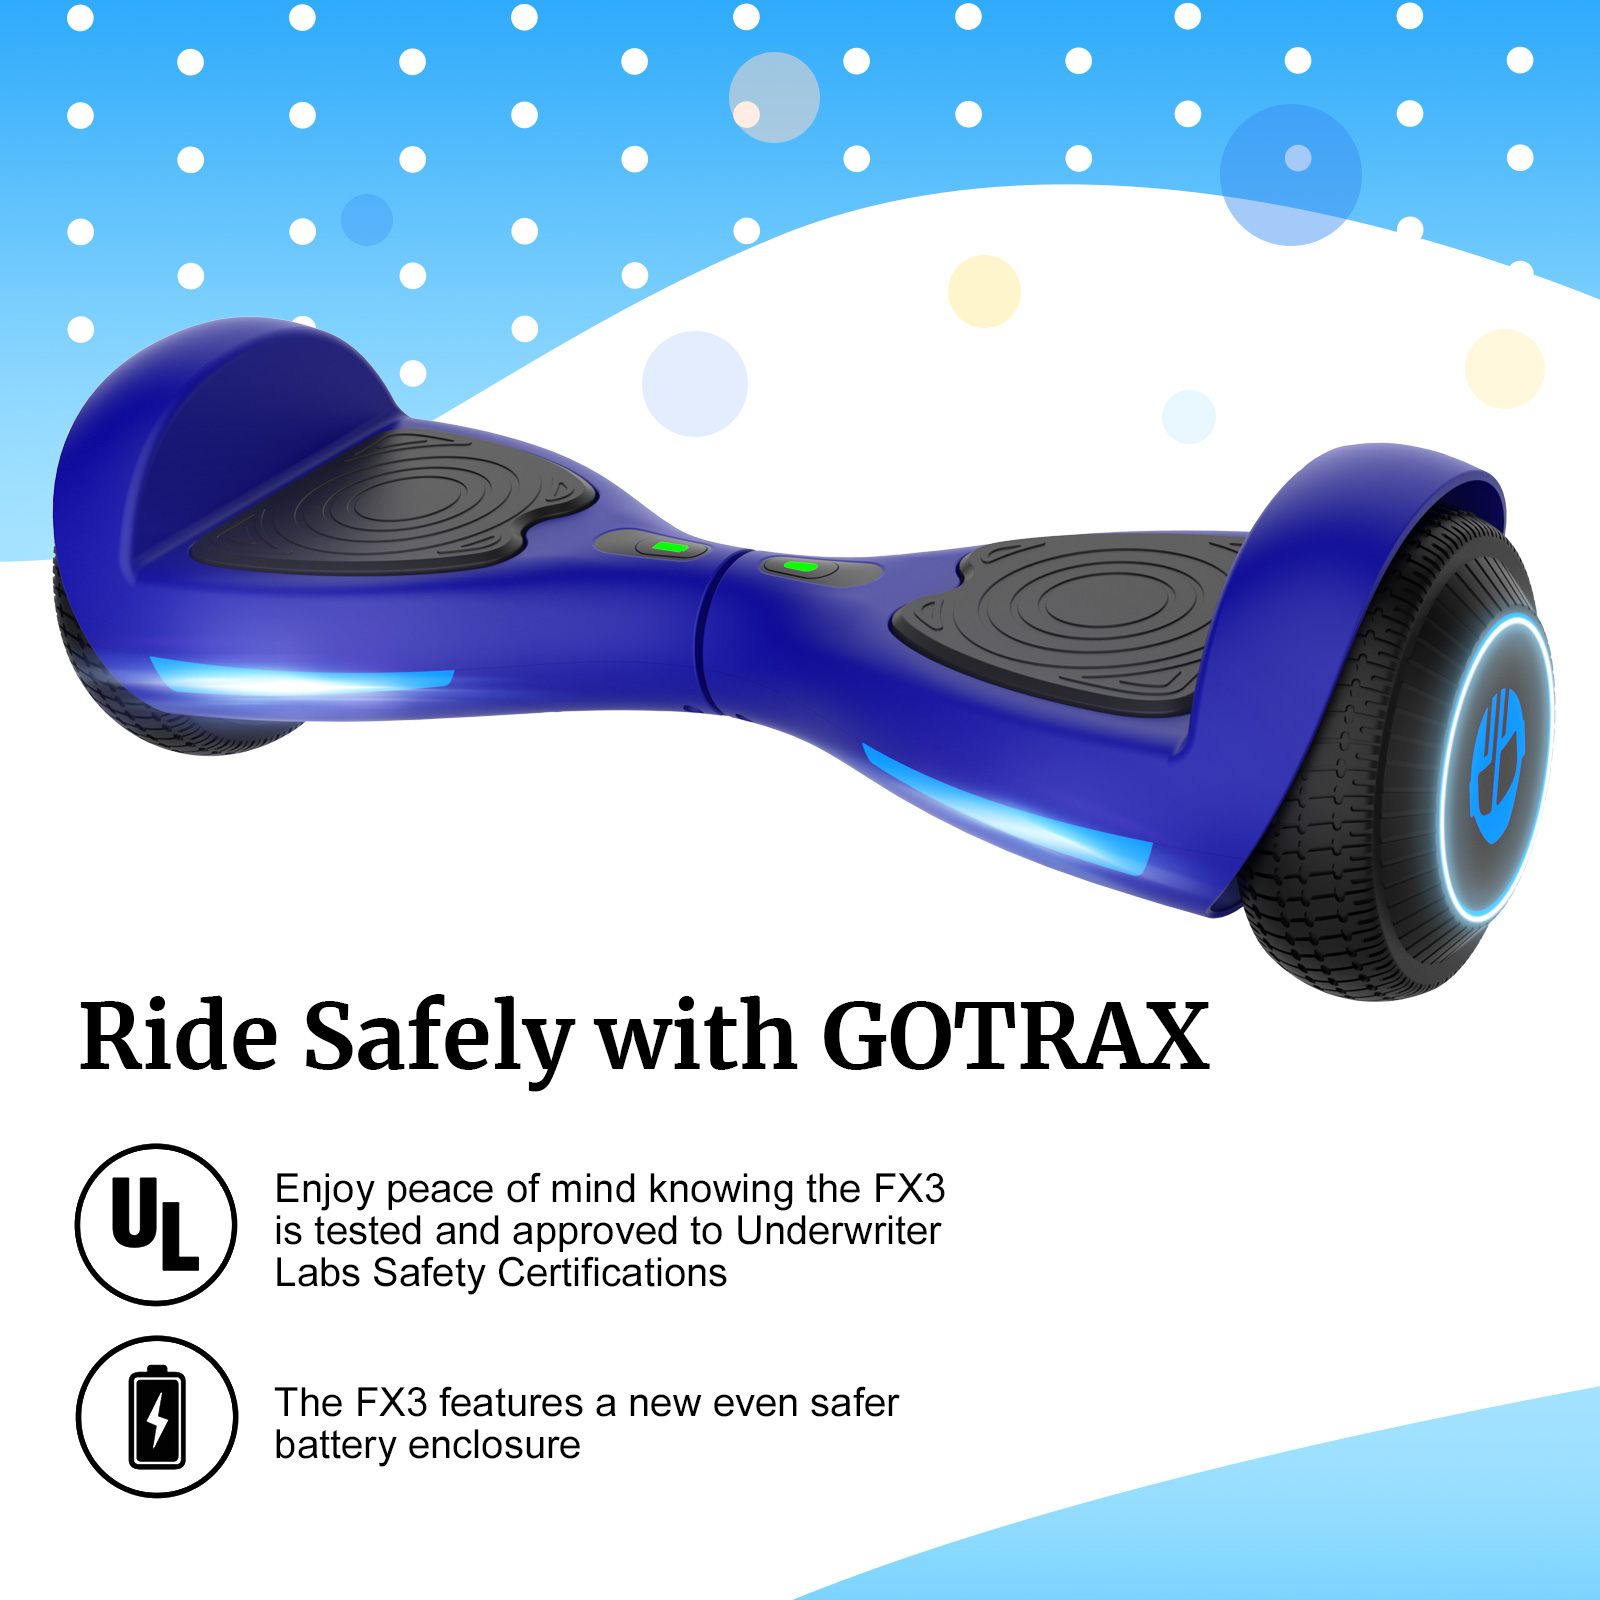 GOTRAX FX3 Hoverboard for Kids Adults,200W Motor 6.5" LED Wheels 6.2mph Speed Hover Board, Blue - image 7 of 12